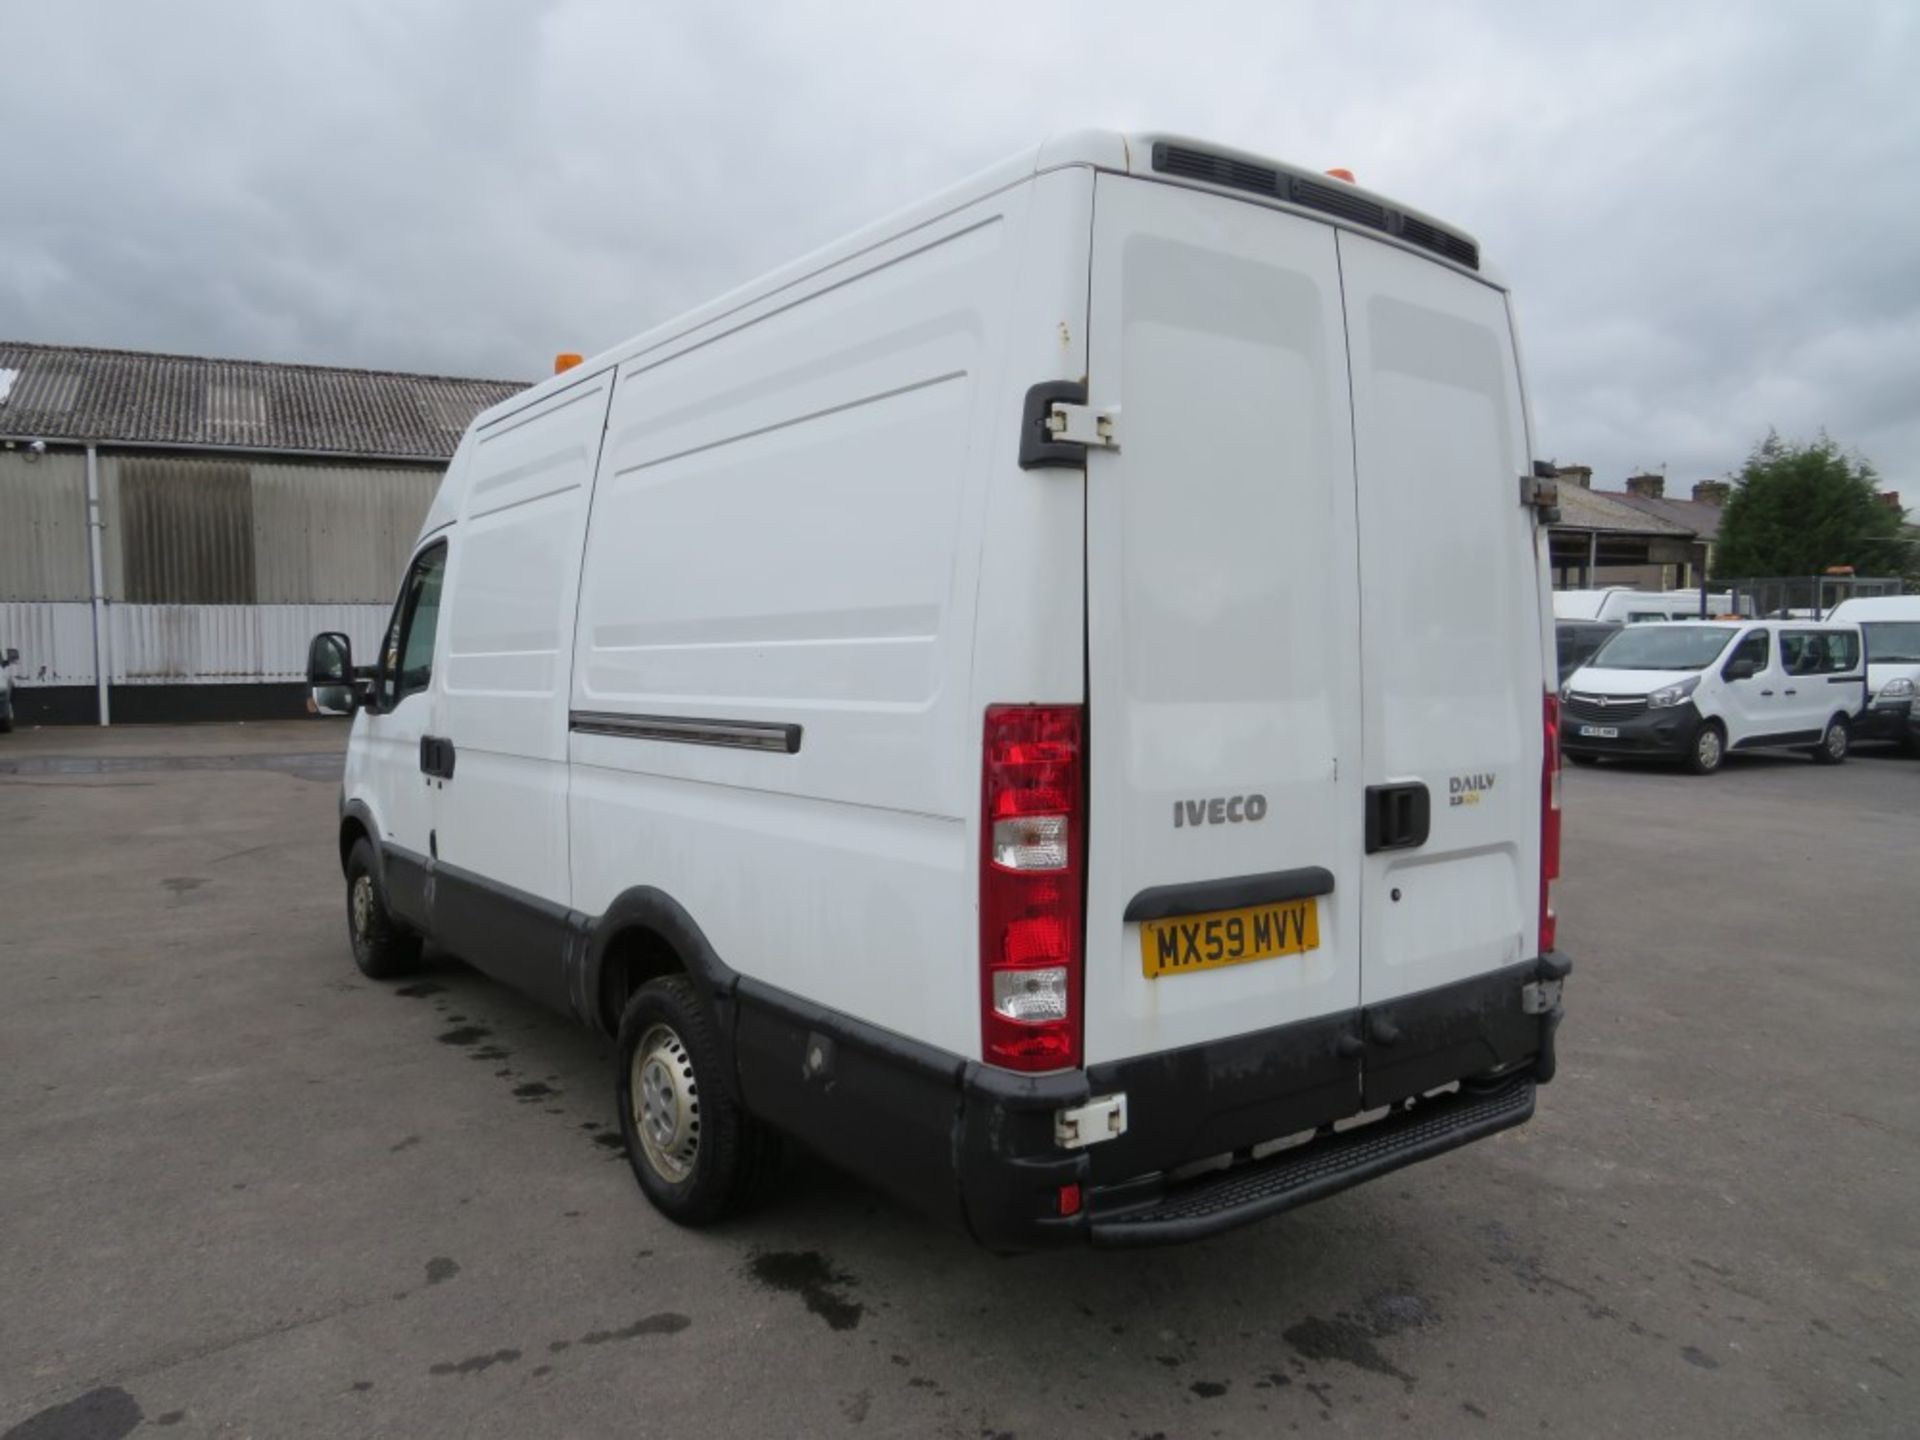 59 reg IVECO DAILY 35S12 MWB (DIRECT COUNCIL) 1ST REG 12/09, TEST 12/20, 127179M, V5 HERE, 1 OWNER - Image 3 of 7